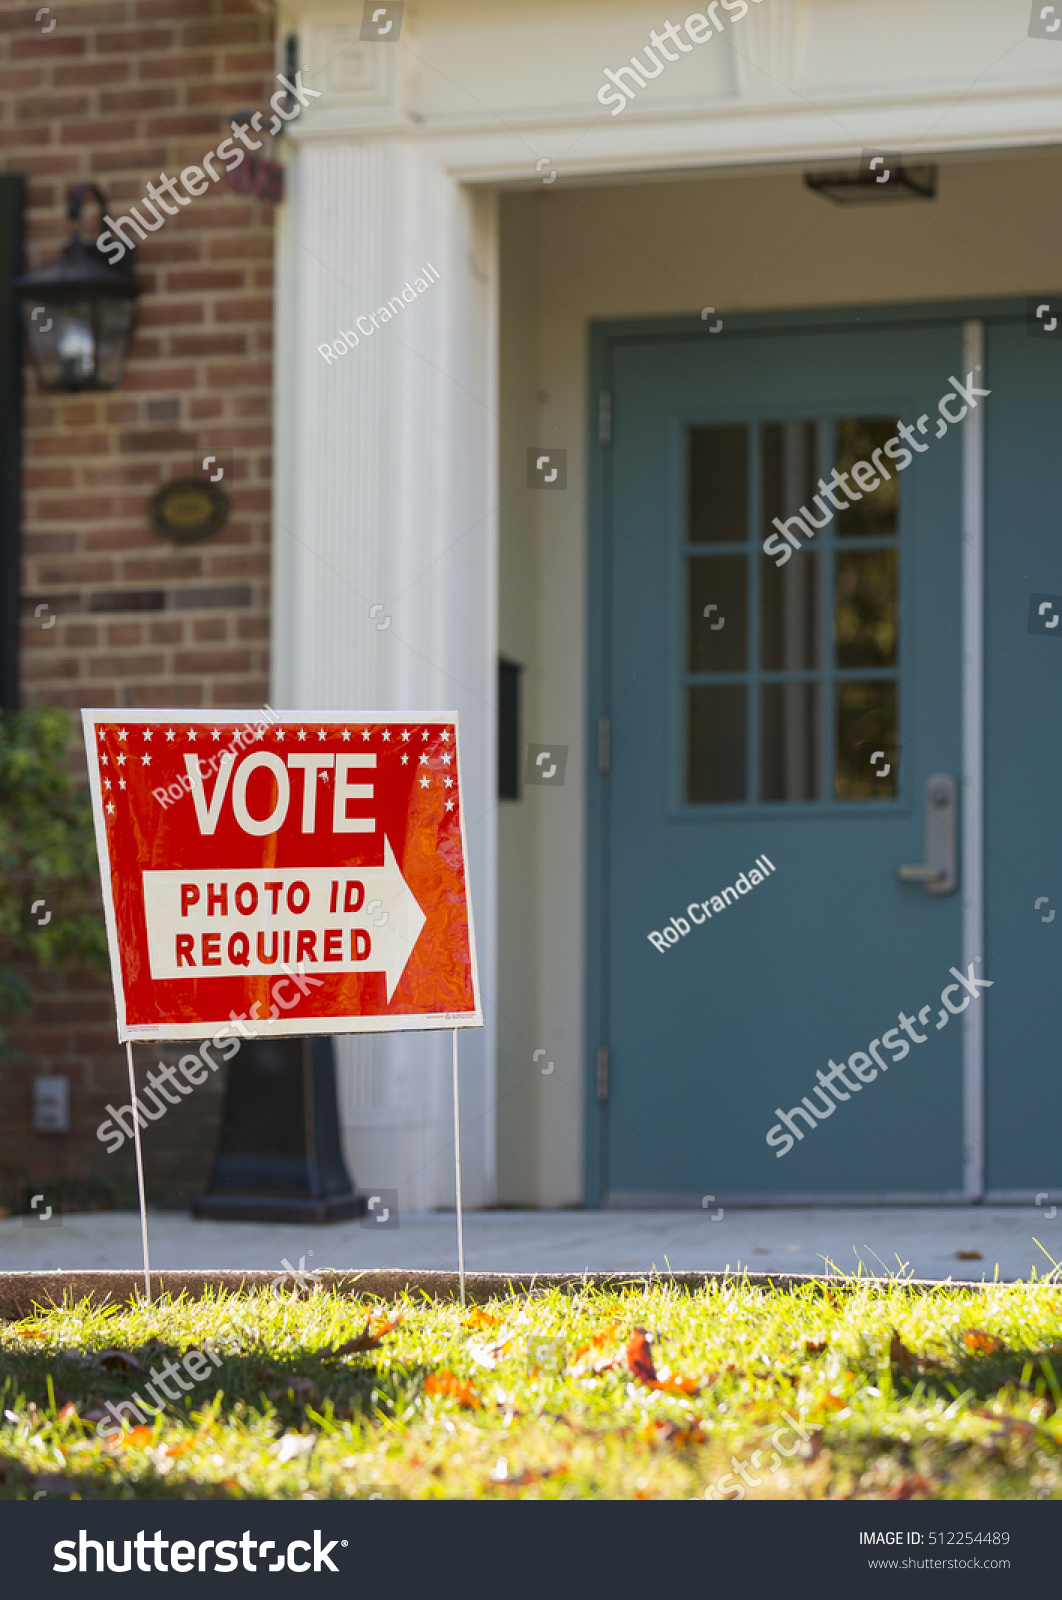 ARLINGTON, VIRGINIA, USA - NOVEMBER 8, 2016: Vote sign on presidential election day. Photo ID Required in Virginia. #512254489